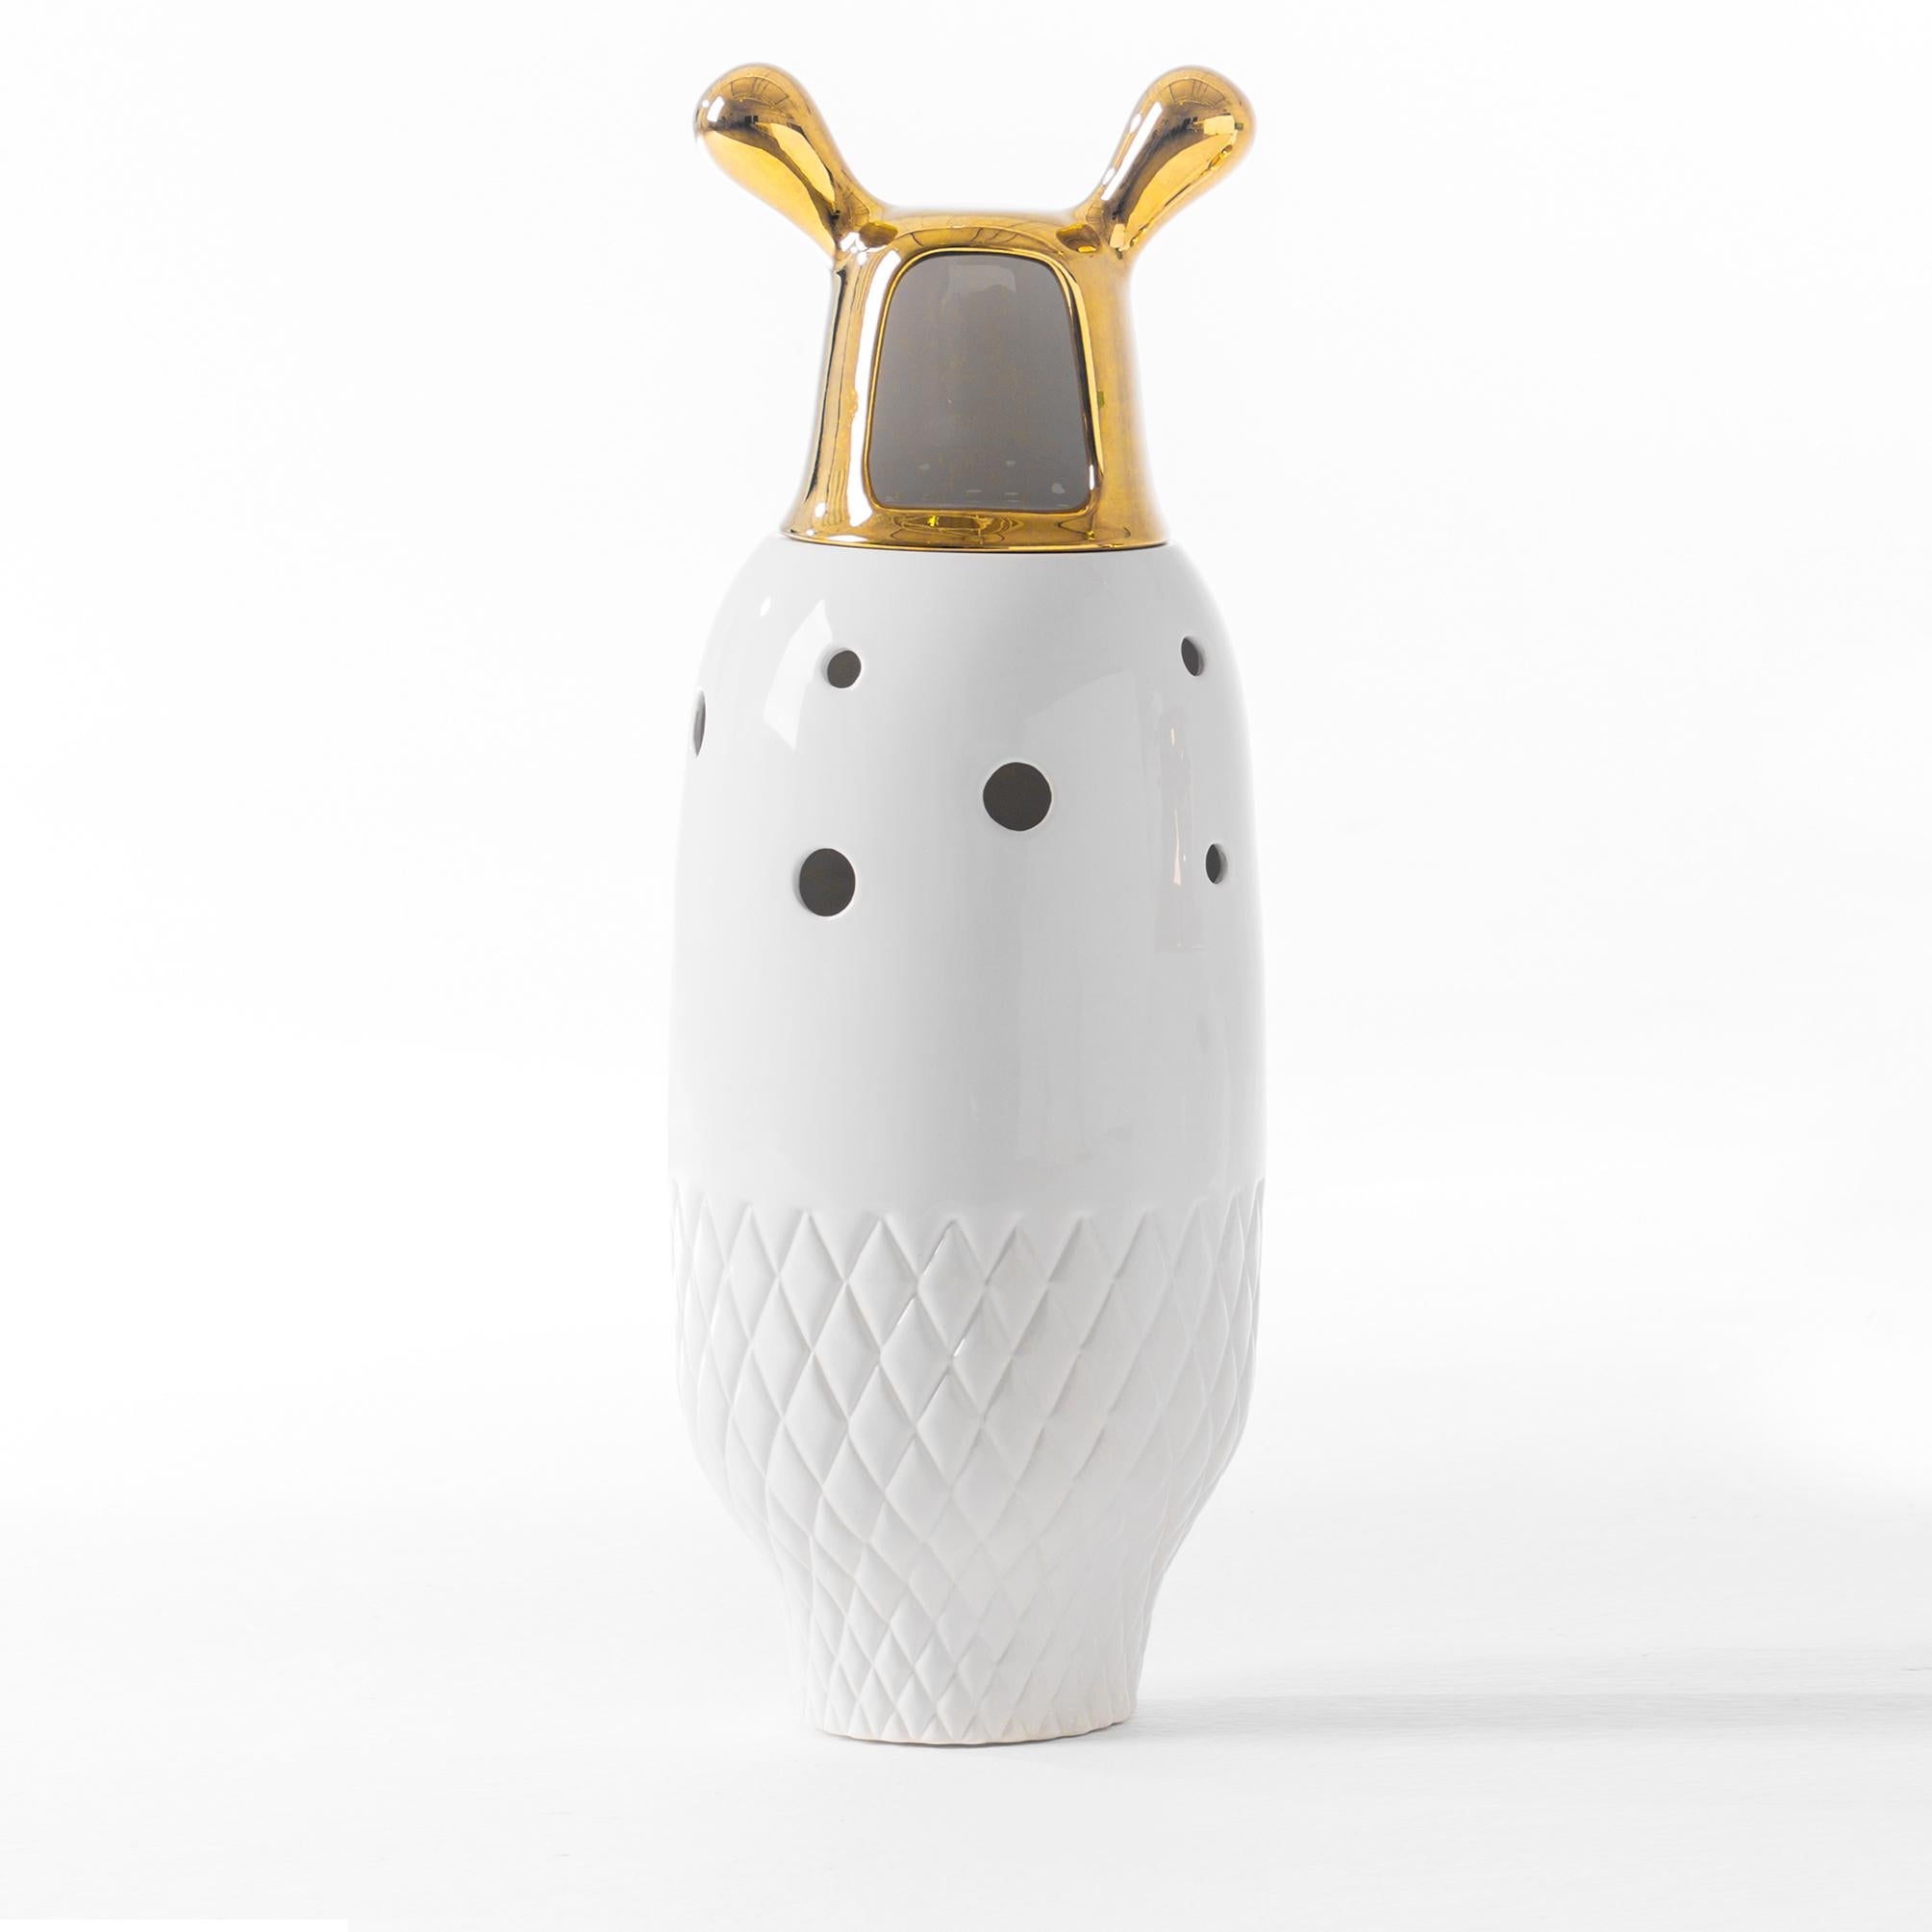 Jaime Hayon Glazed Stoneware 'Showtime 10' White Gold Vase Number 5 In Good Condition For Sale In Barcelona, Barcelona